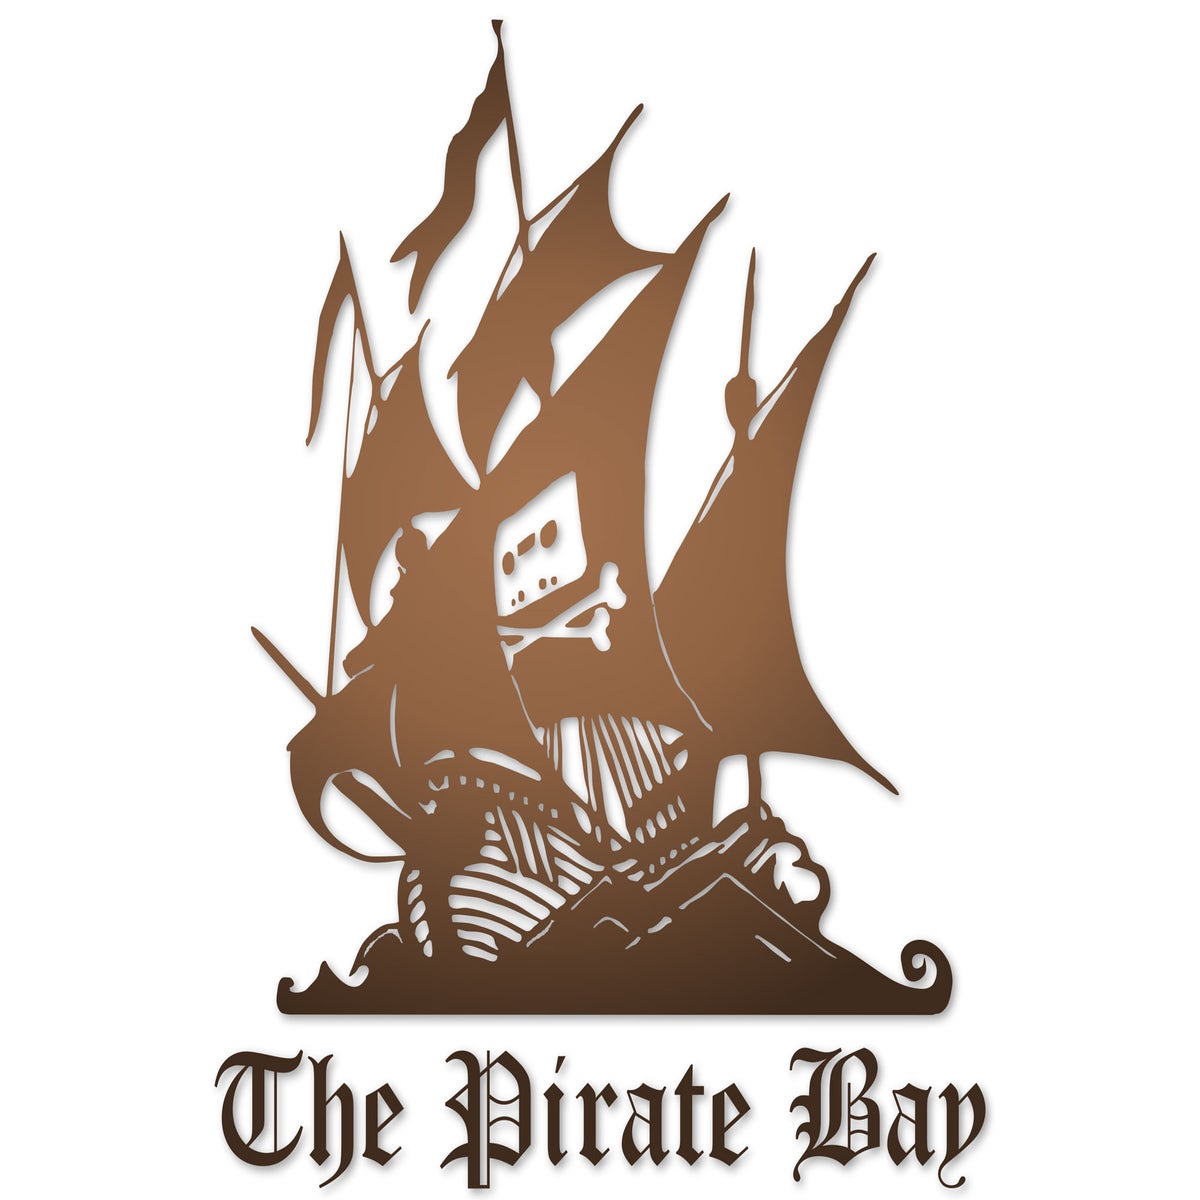 Pirate Bay revived by rival piracy site, Piracy